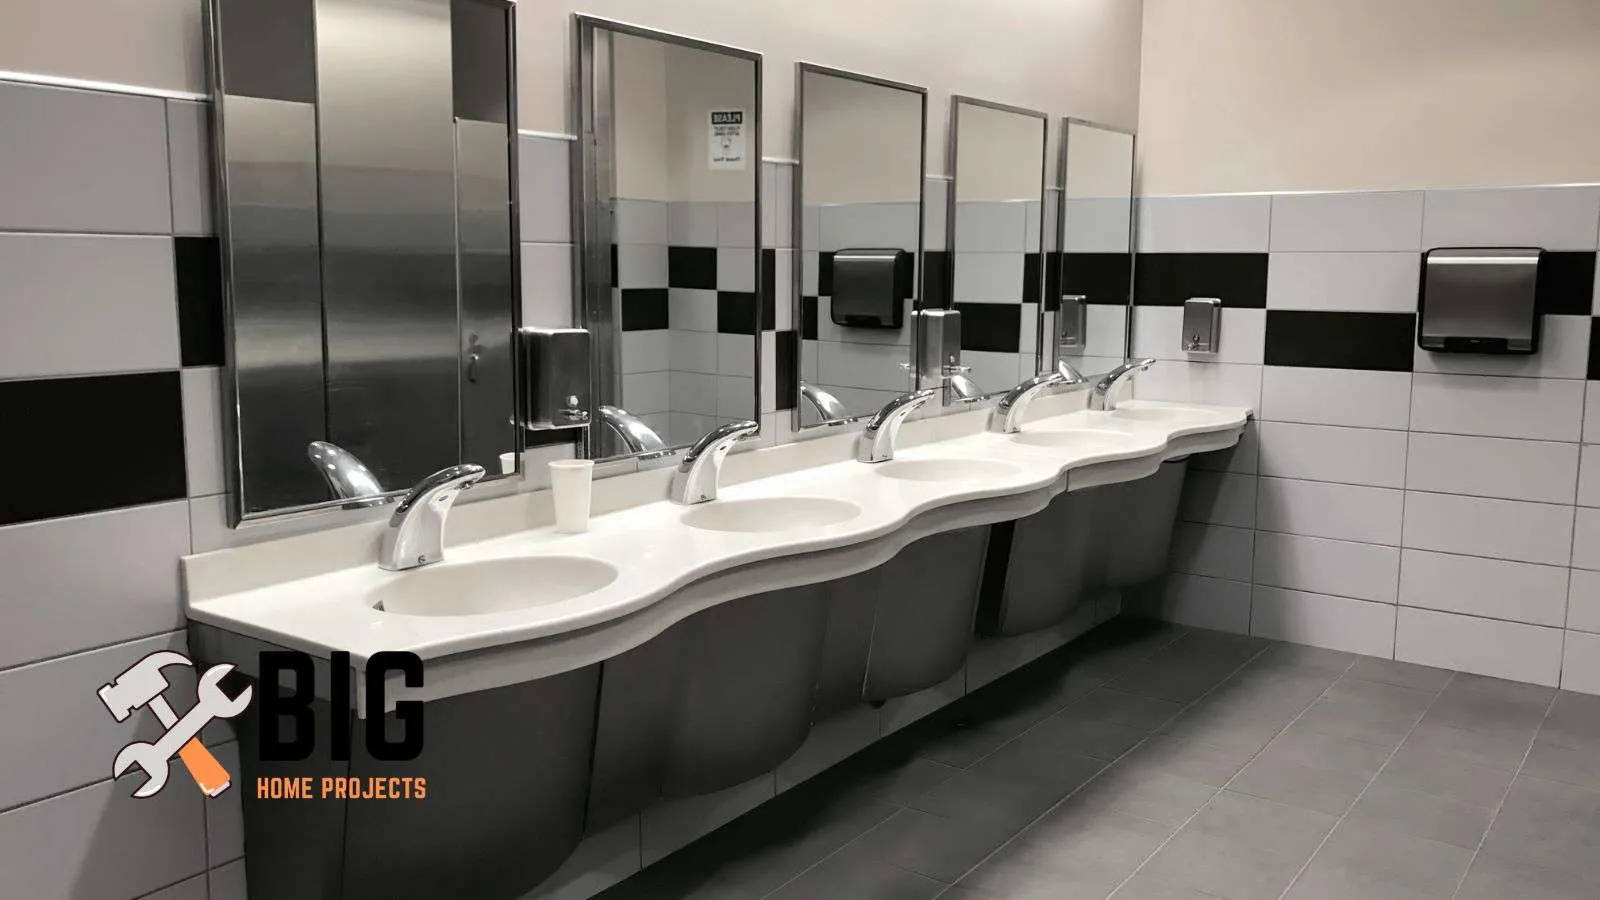 Restroom with multiple sinks - bighomeprojects.com